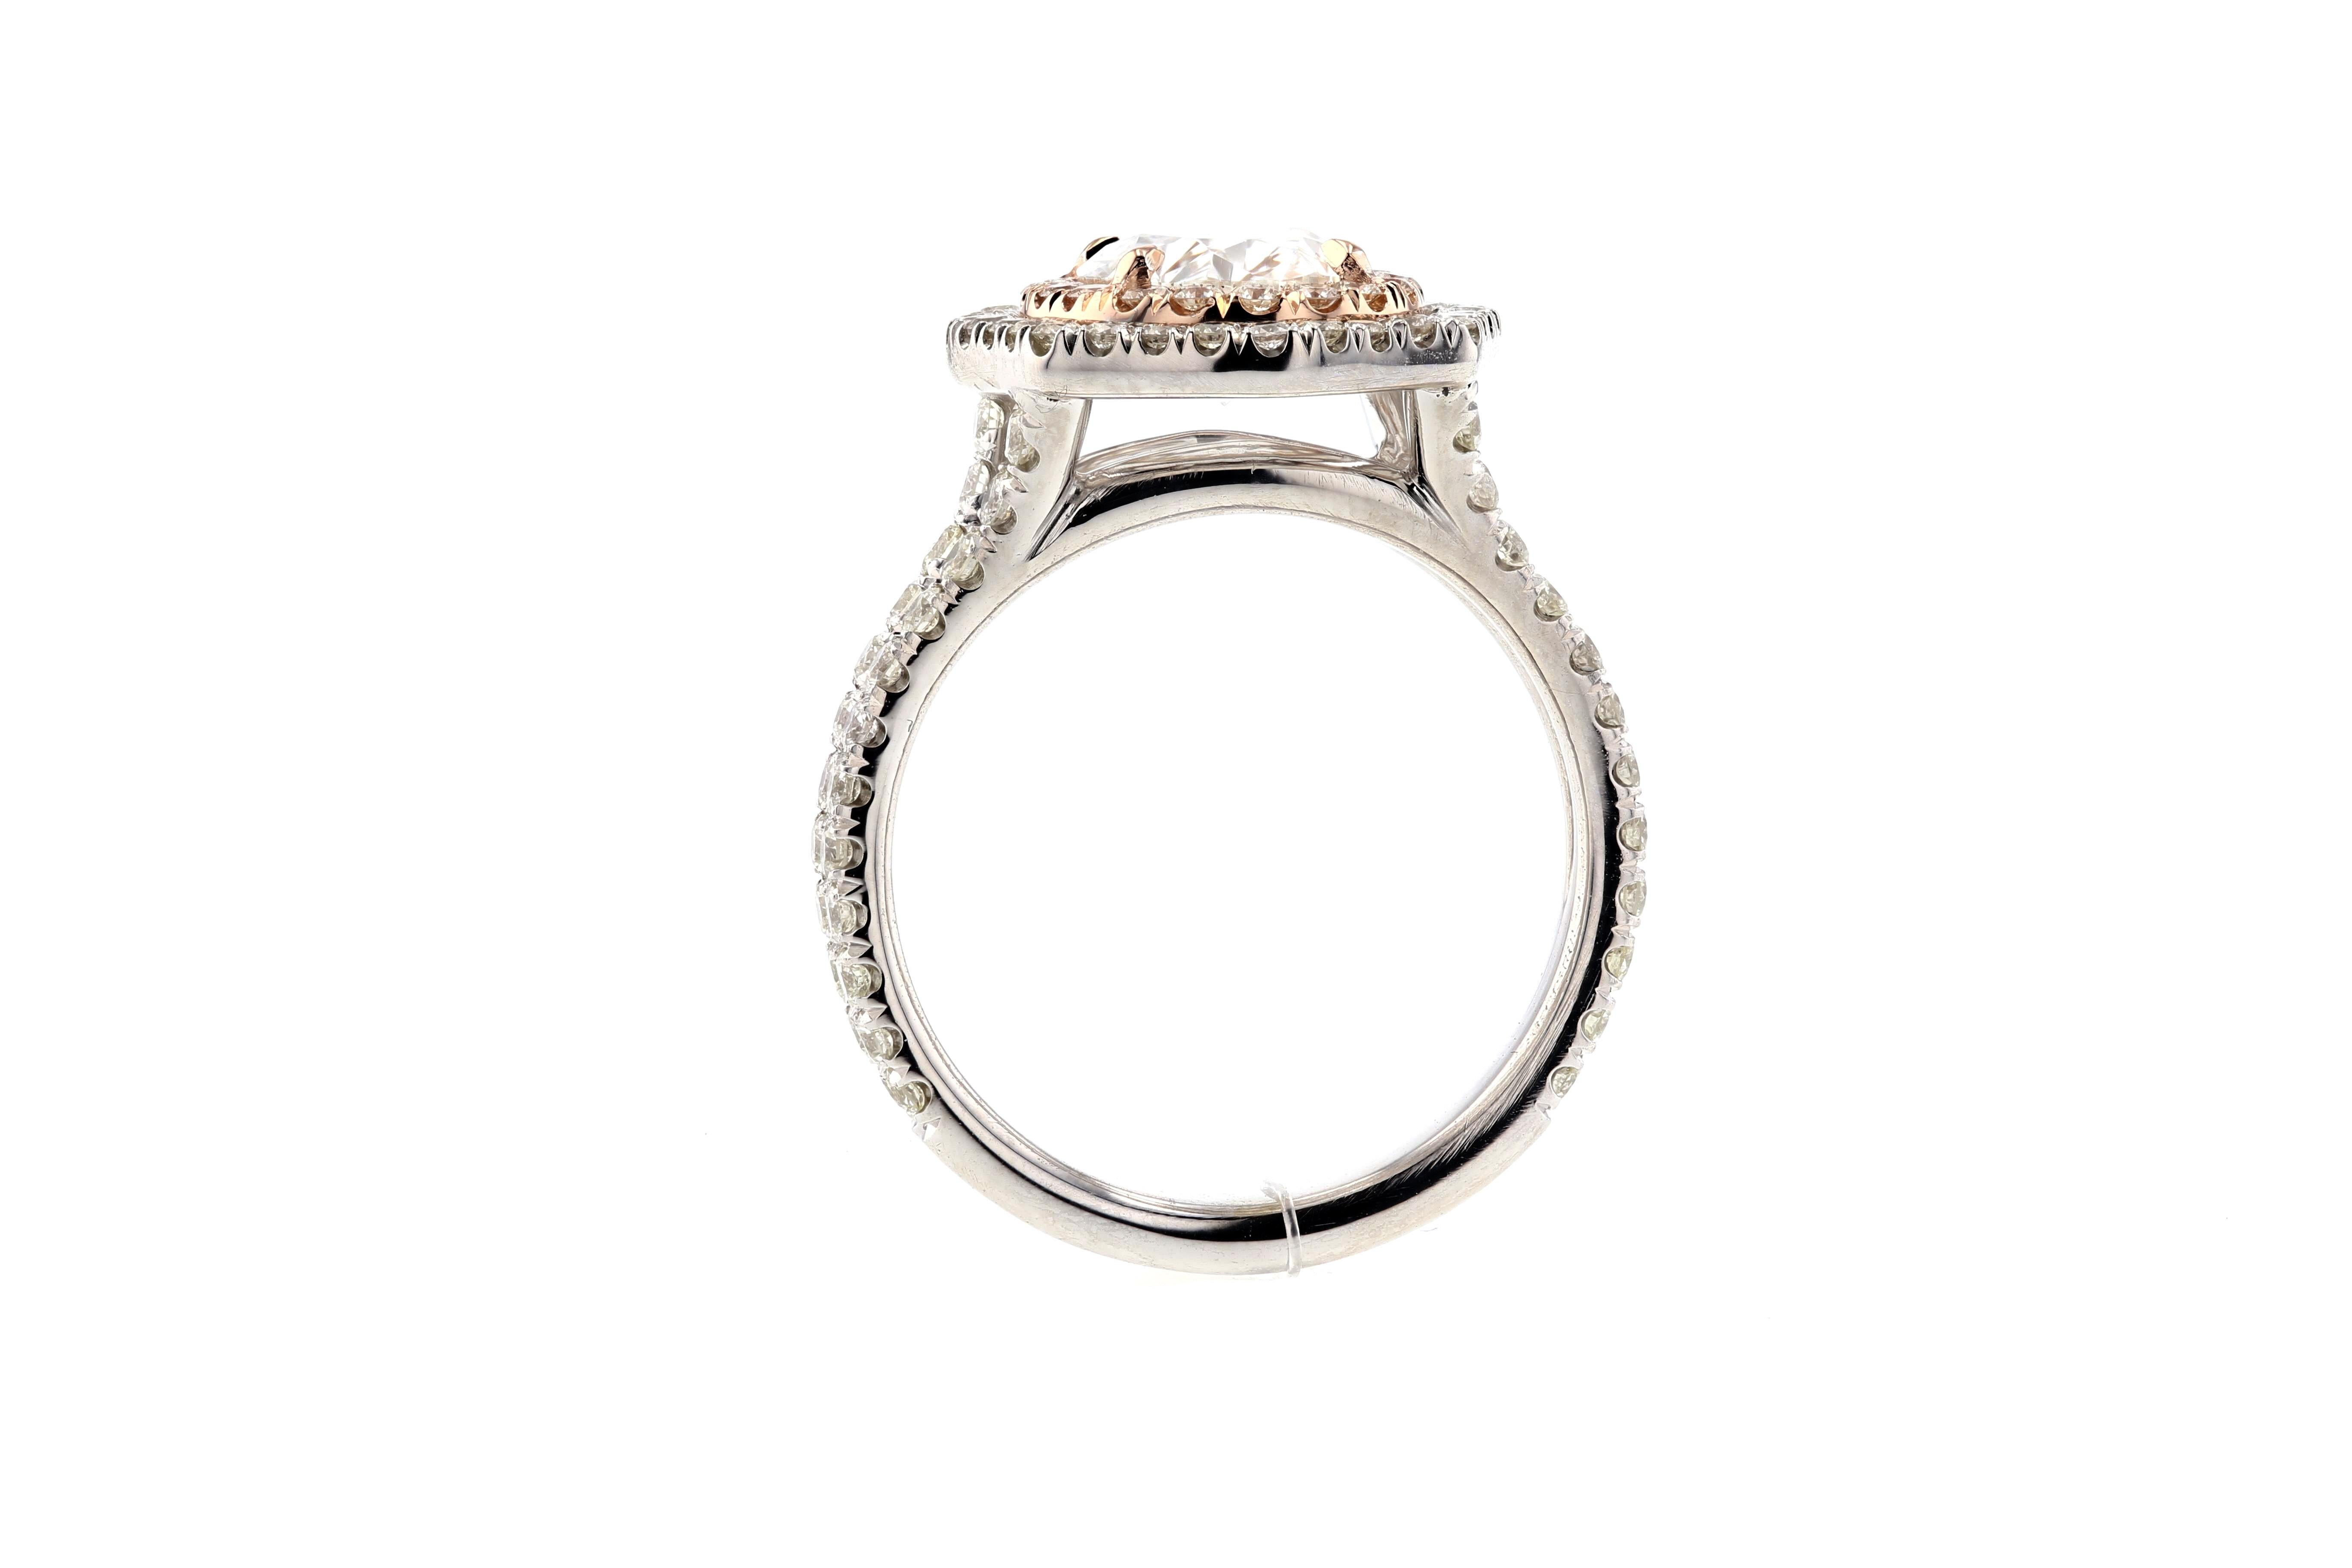 This custom oval diamond engagement ring features a double diamond halo. One halo is set in white gold and the other in rose gold, giving it a unique two tone look. The look is made complete with a split shank covered in diamond pave and an